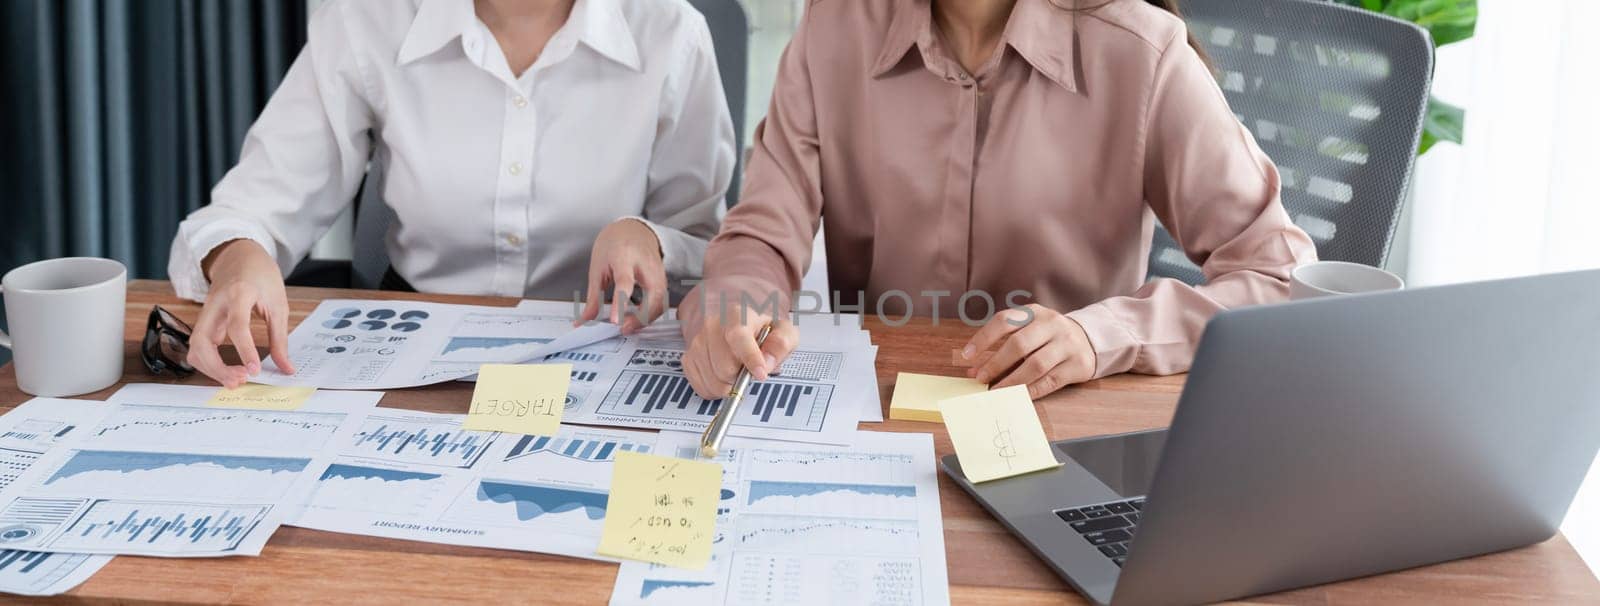 Closeup analyst team colleagues discuss financial data on digital dashboard, analyzing charts and graph with supportive teamwork. Professional office use BI to plan marketing business. Enthusiastic